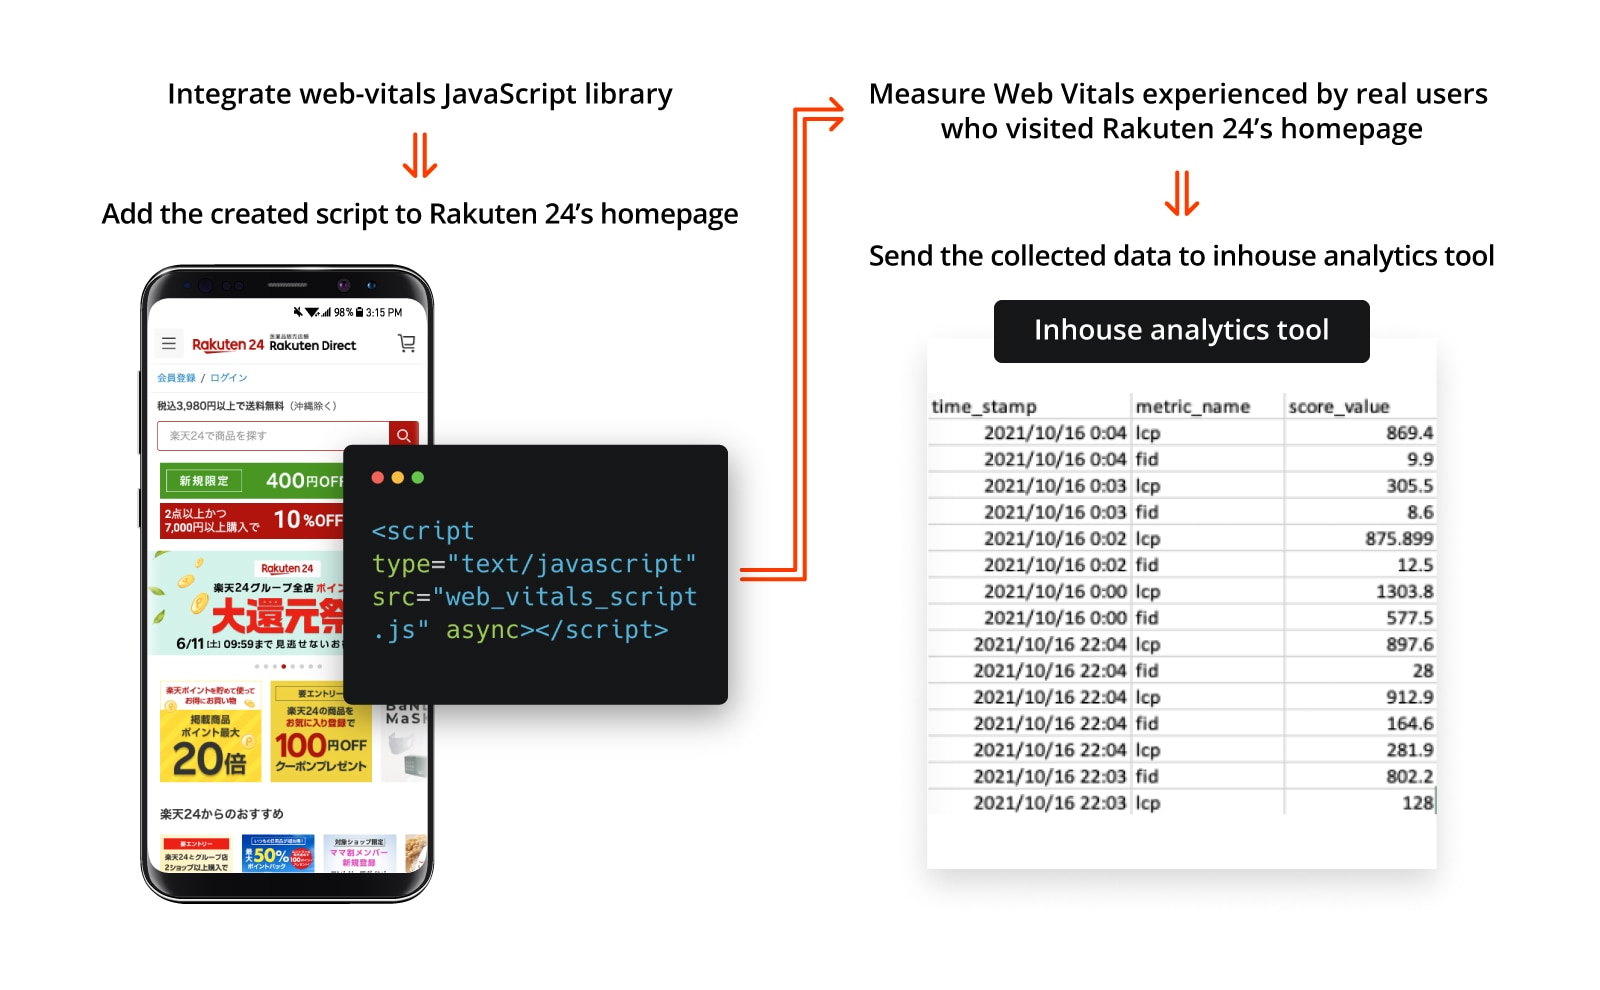 Rakuten 24's web vitals tracking integration flow. The first step is to integrate the web-vitals library by adding the script to the Rakuten 24 website. After that, web vitals can be measured from real user metrics, and the data is sent to Rakuten 24's in-house data collection tool.